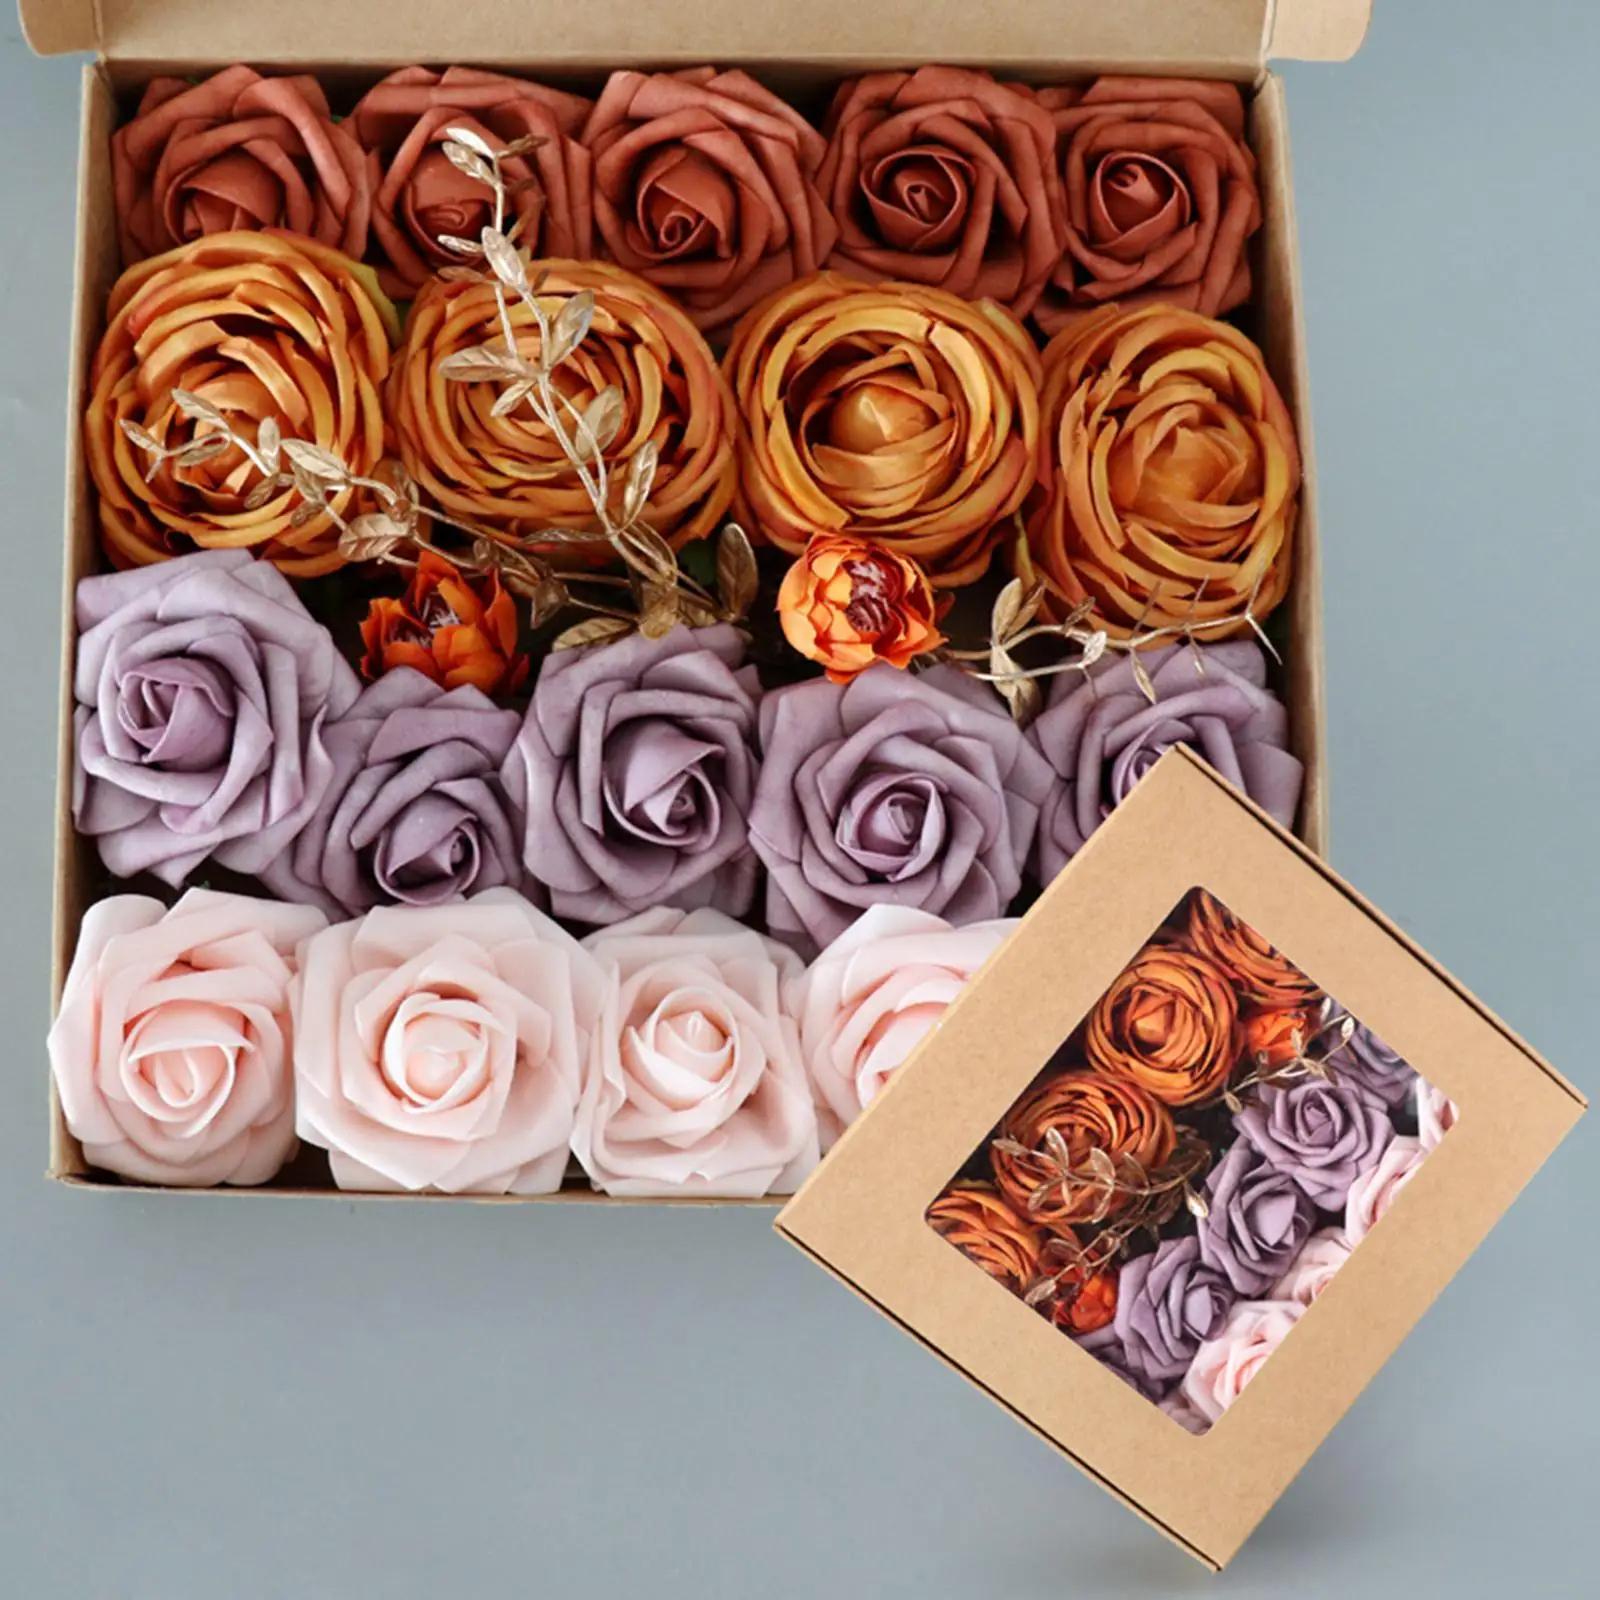 Lifelike Artificial Flowers Box Multiple Use DIY Fake Flower Silk Roses for Home Ornament Centerpieces Wedding Table Chair Decor